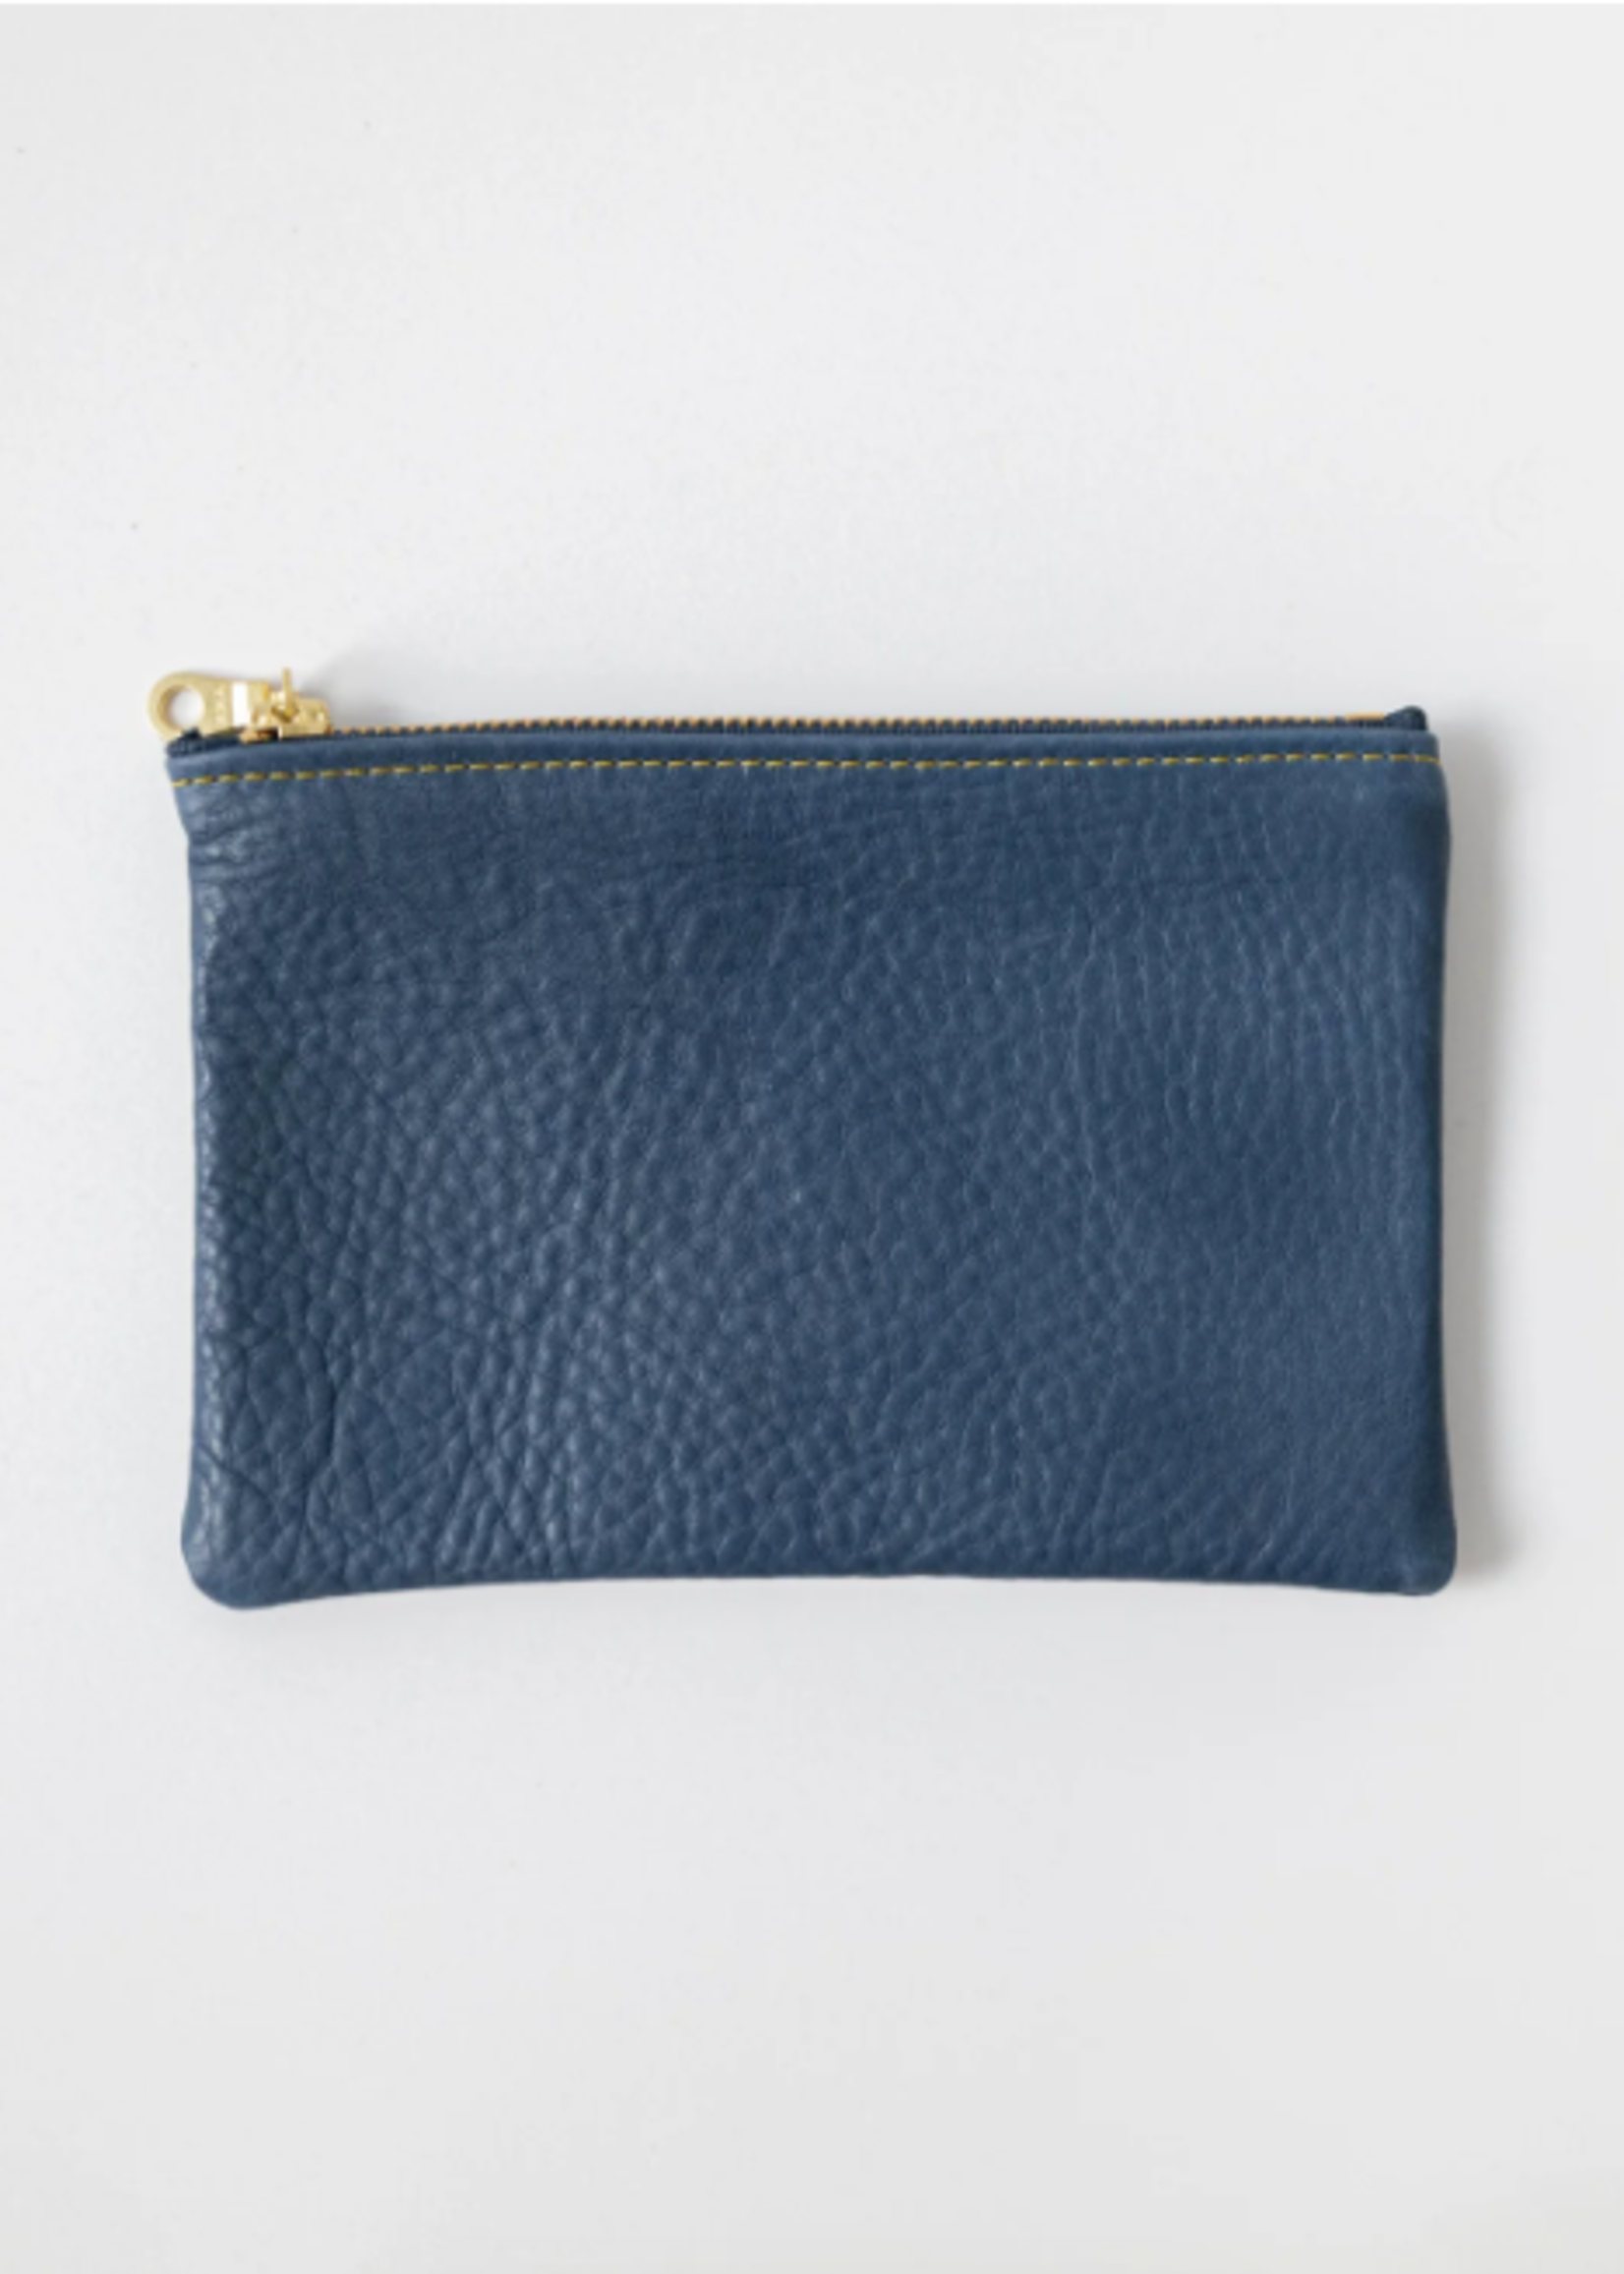 Kyle Martin Small Zip Pouch